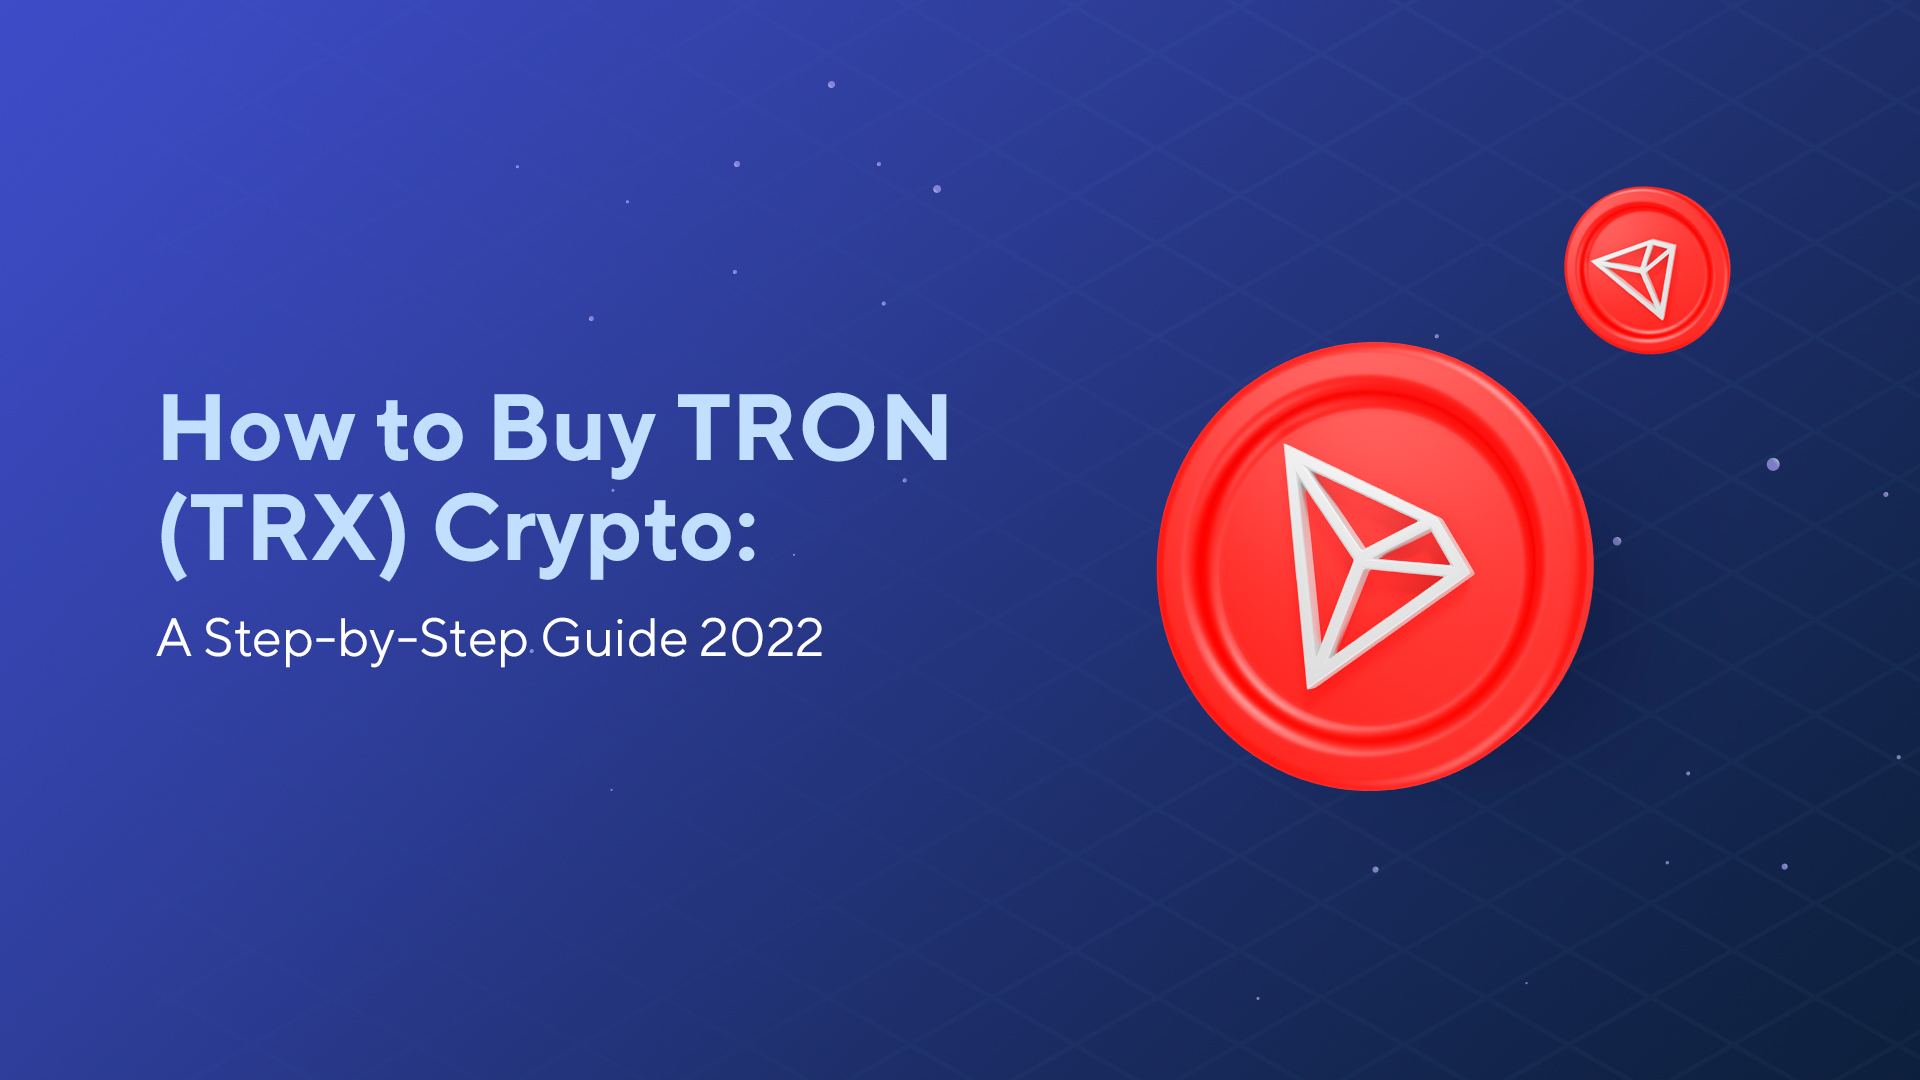 How to Buy TRON (TRX) Crypto: A Step-by-Step Guide 2022